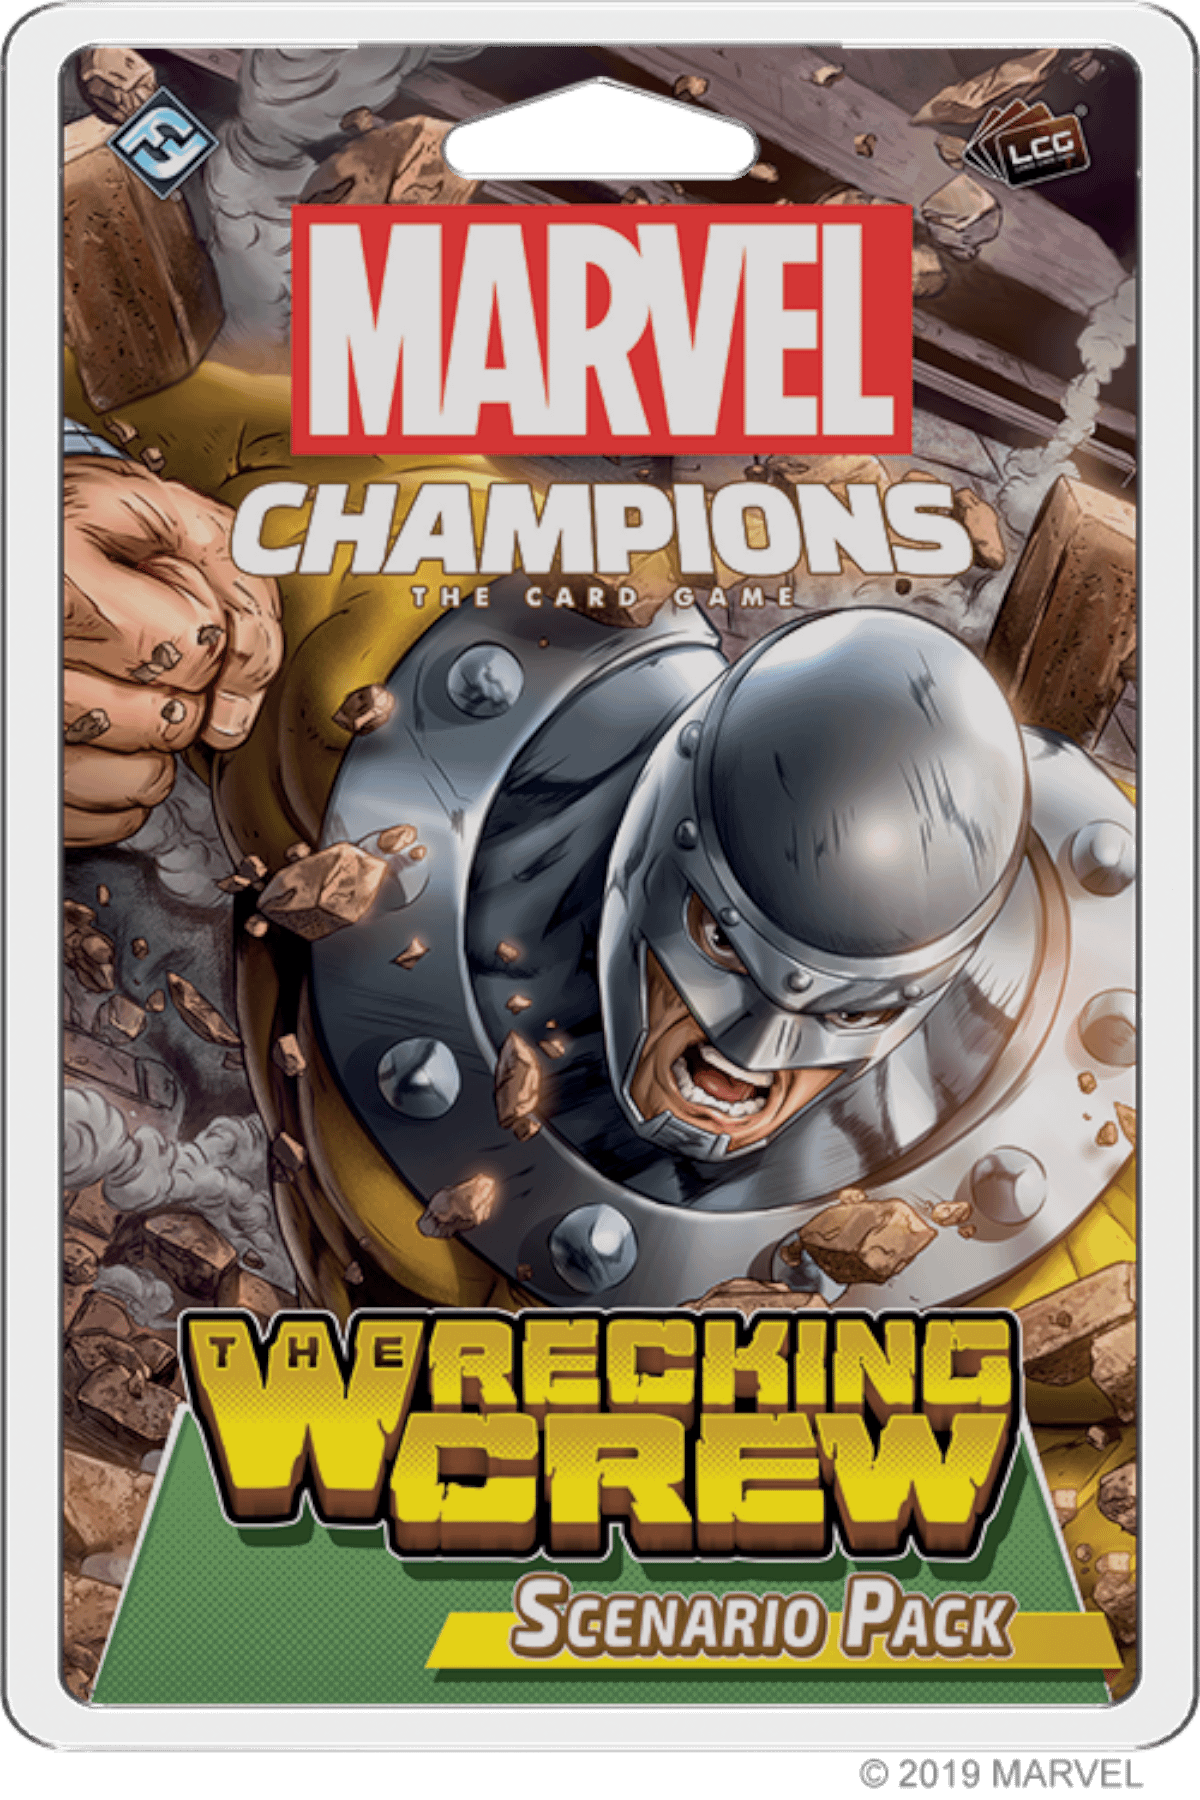 Marvel Champions" Card Game is About to Wrecked